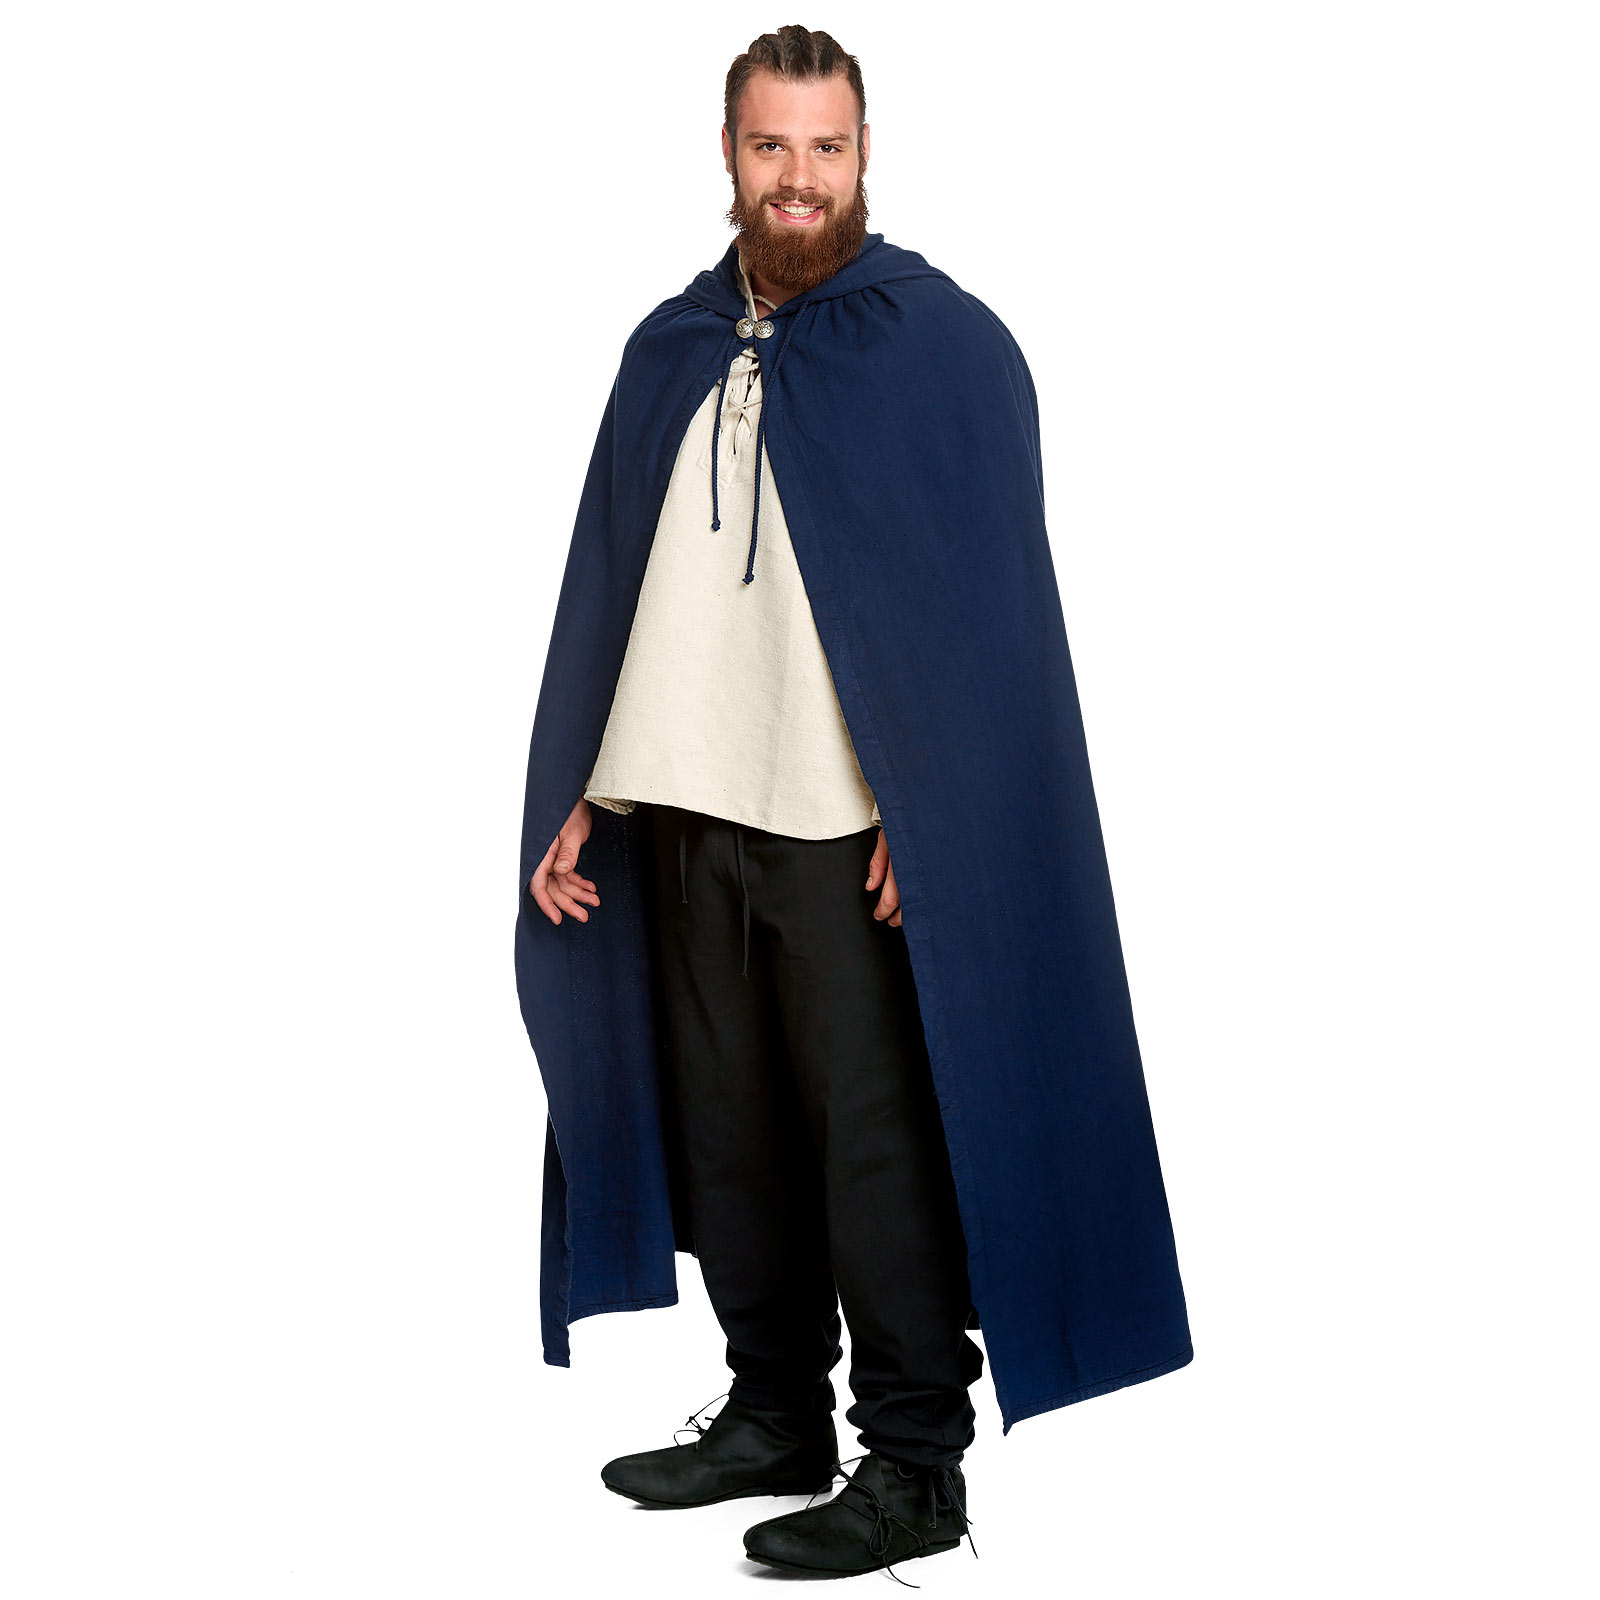 Medieval Cloak with Pointed Hood in Blue